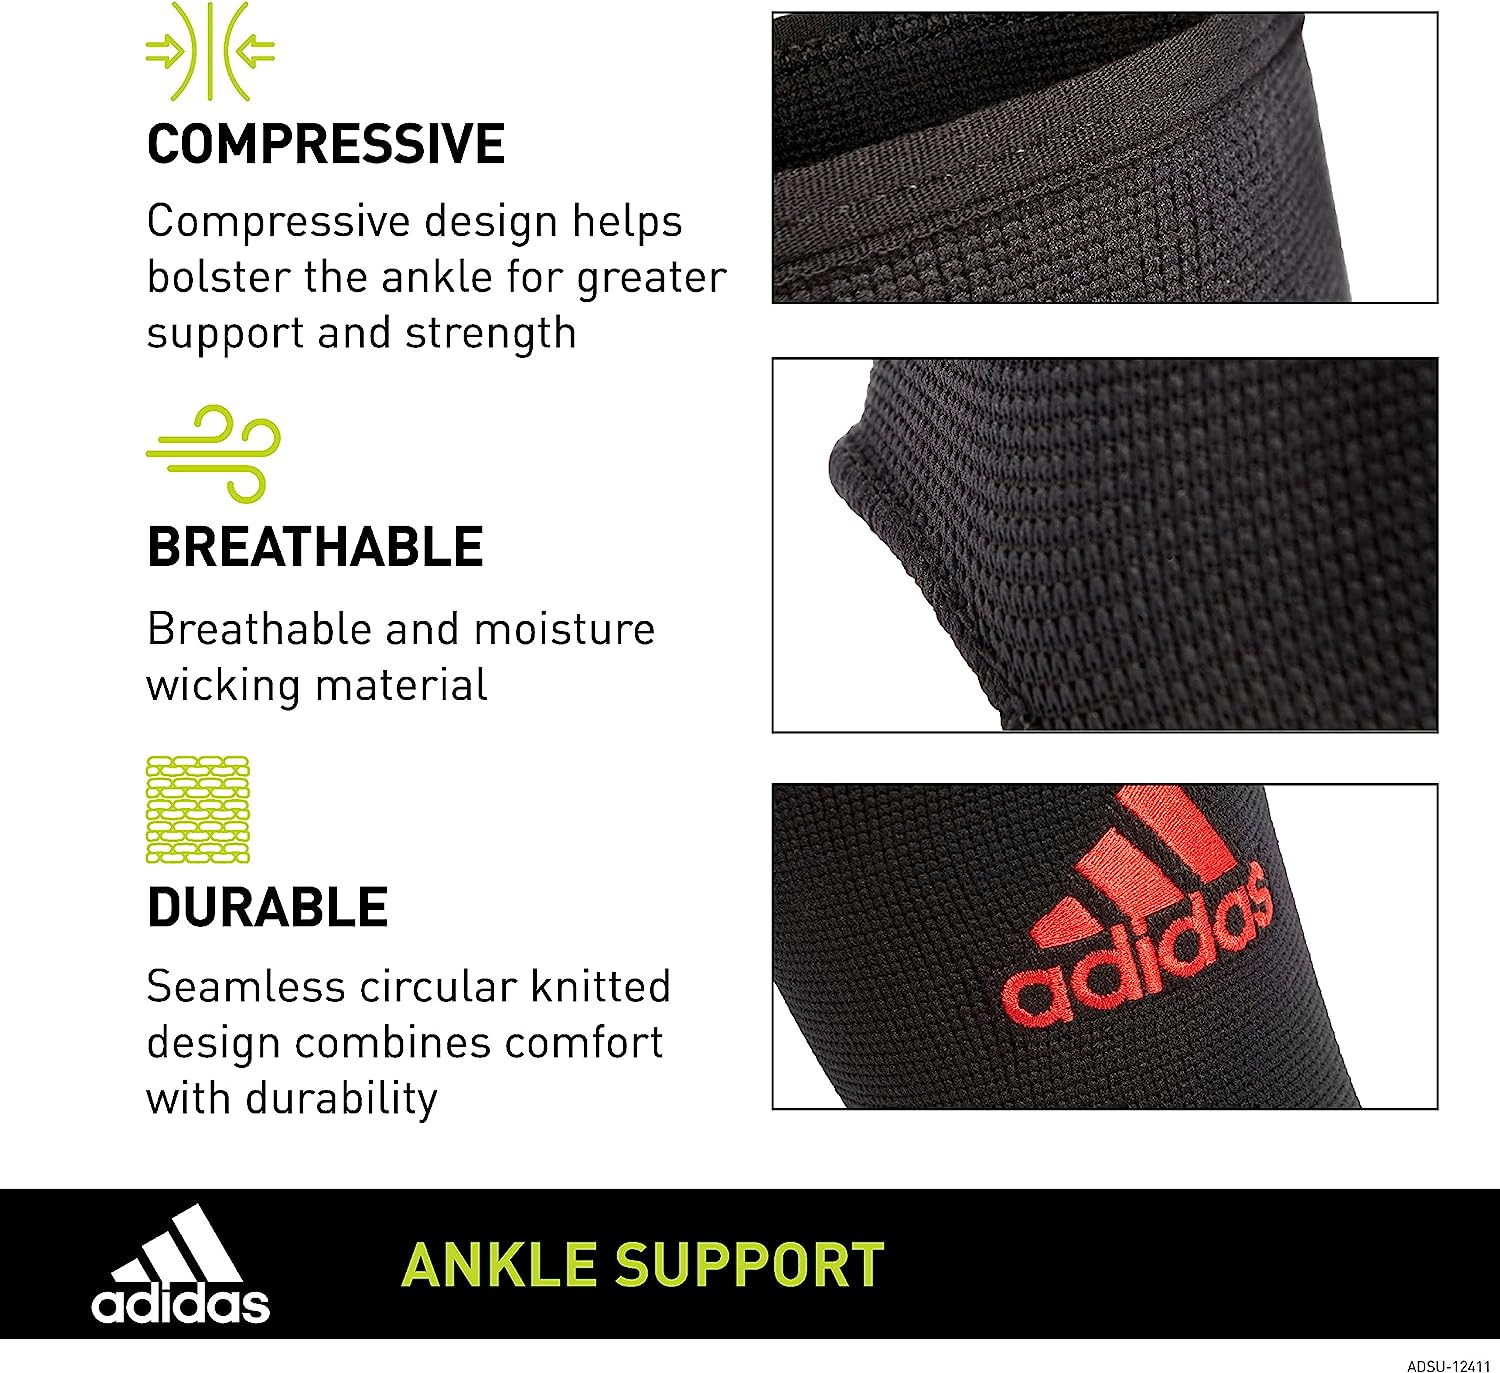 Adidas ADSU-12411RD Ankle Support